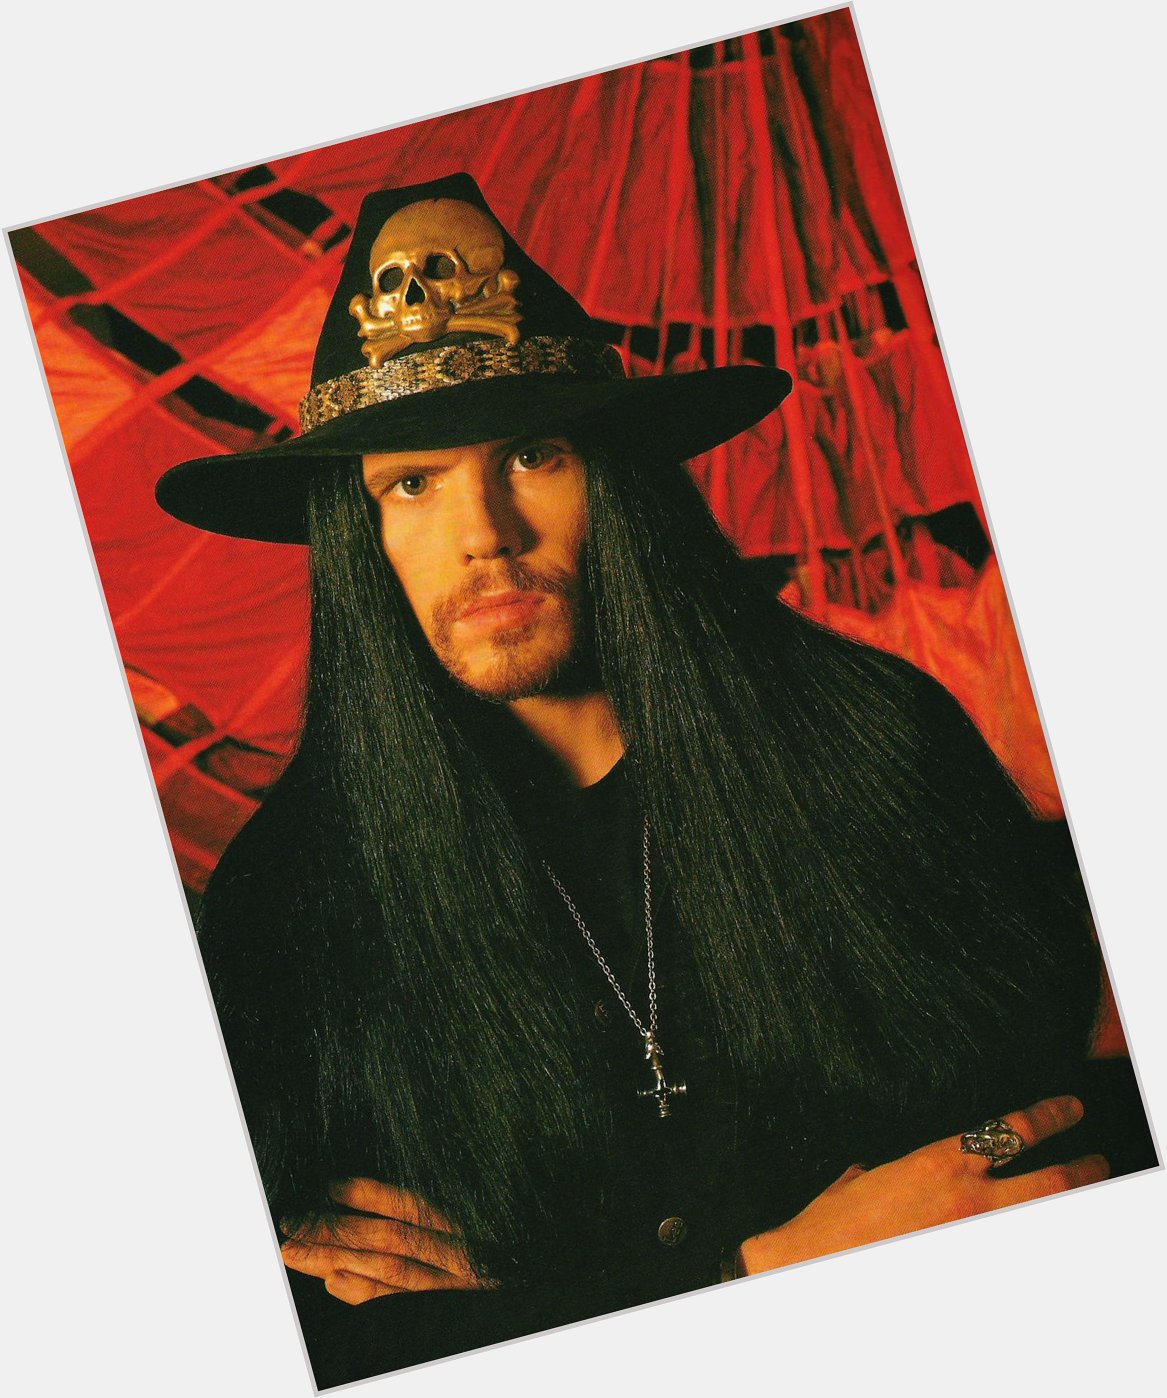 Happy Birthday to The Cult singer Ian Astbury. He turns 59 today. 